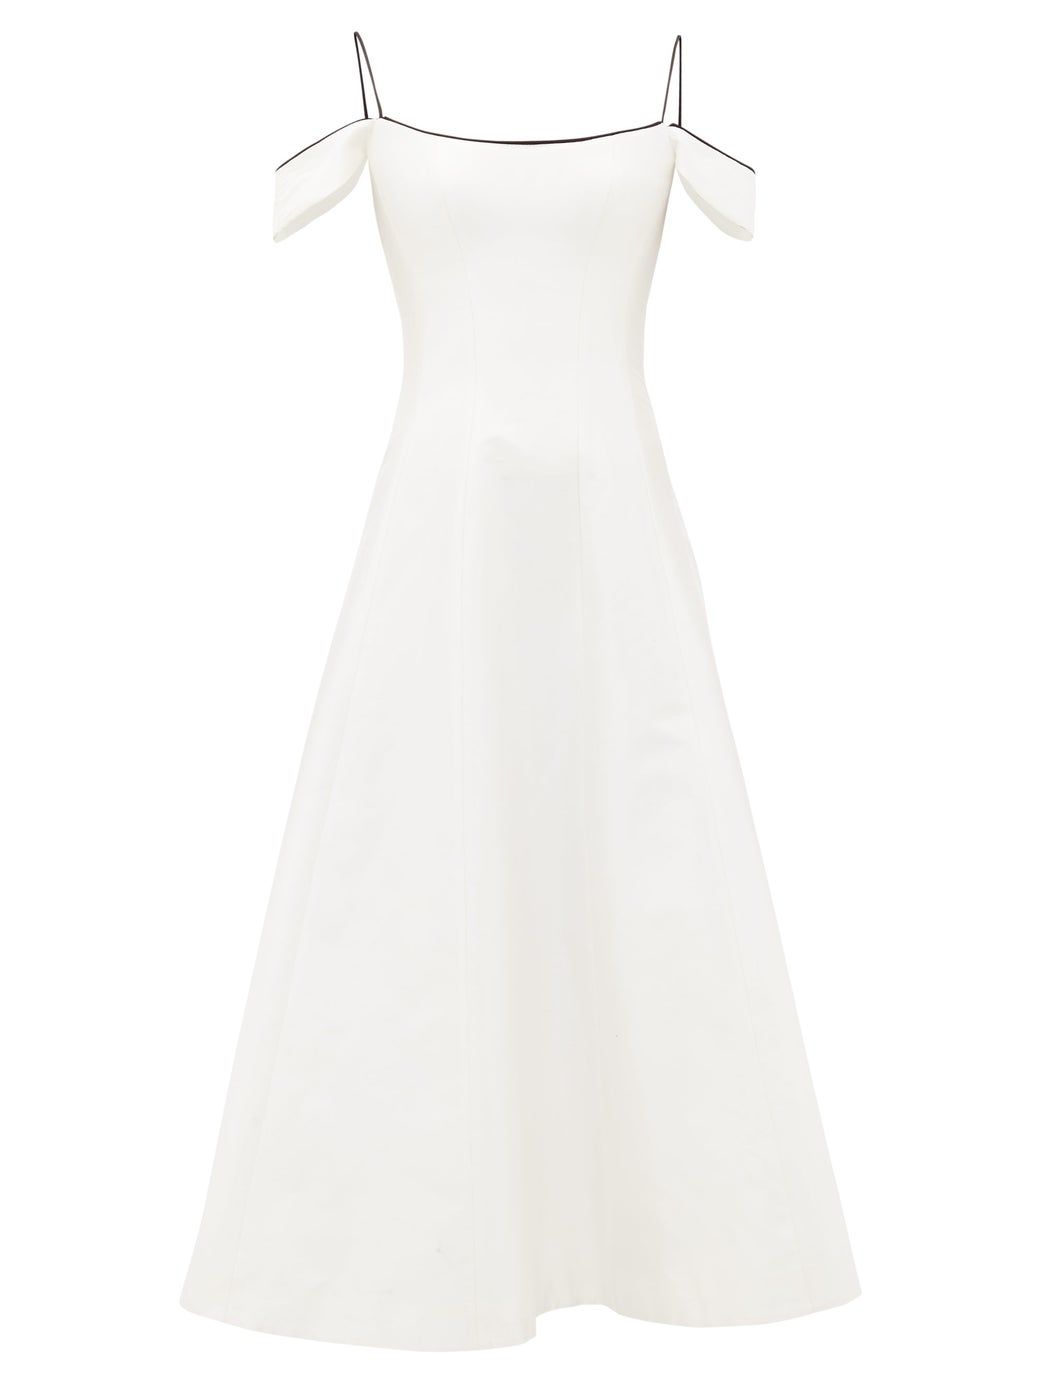 white dress for party wear